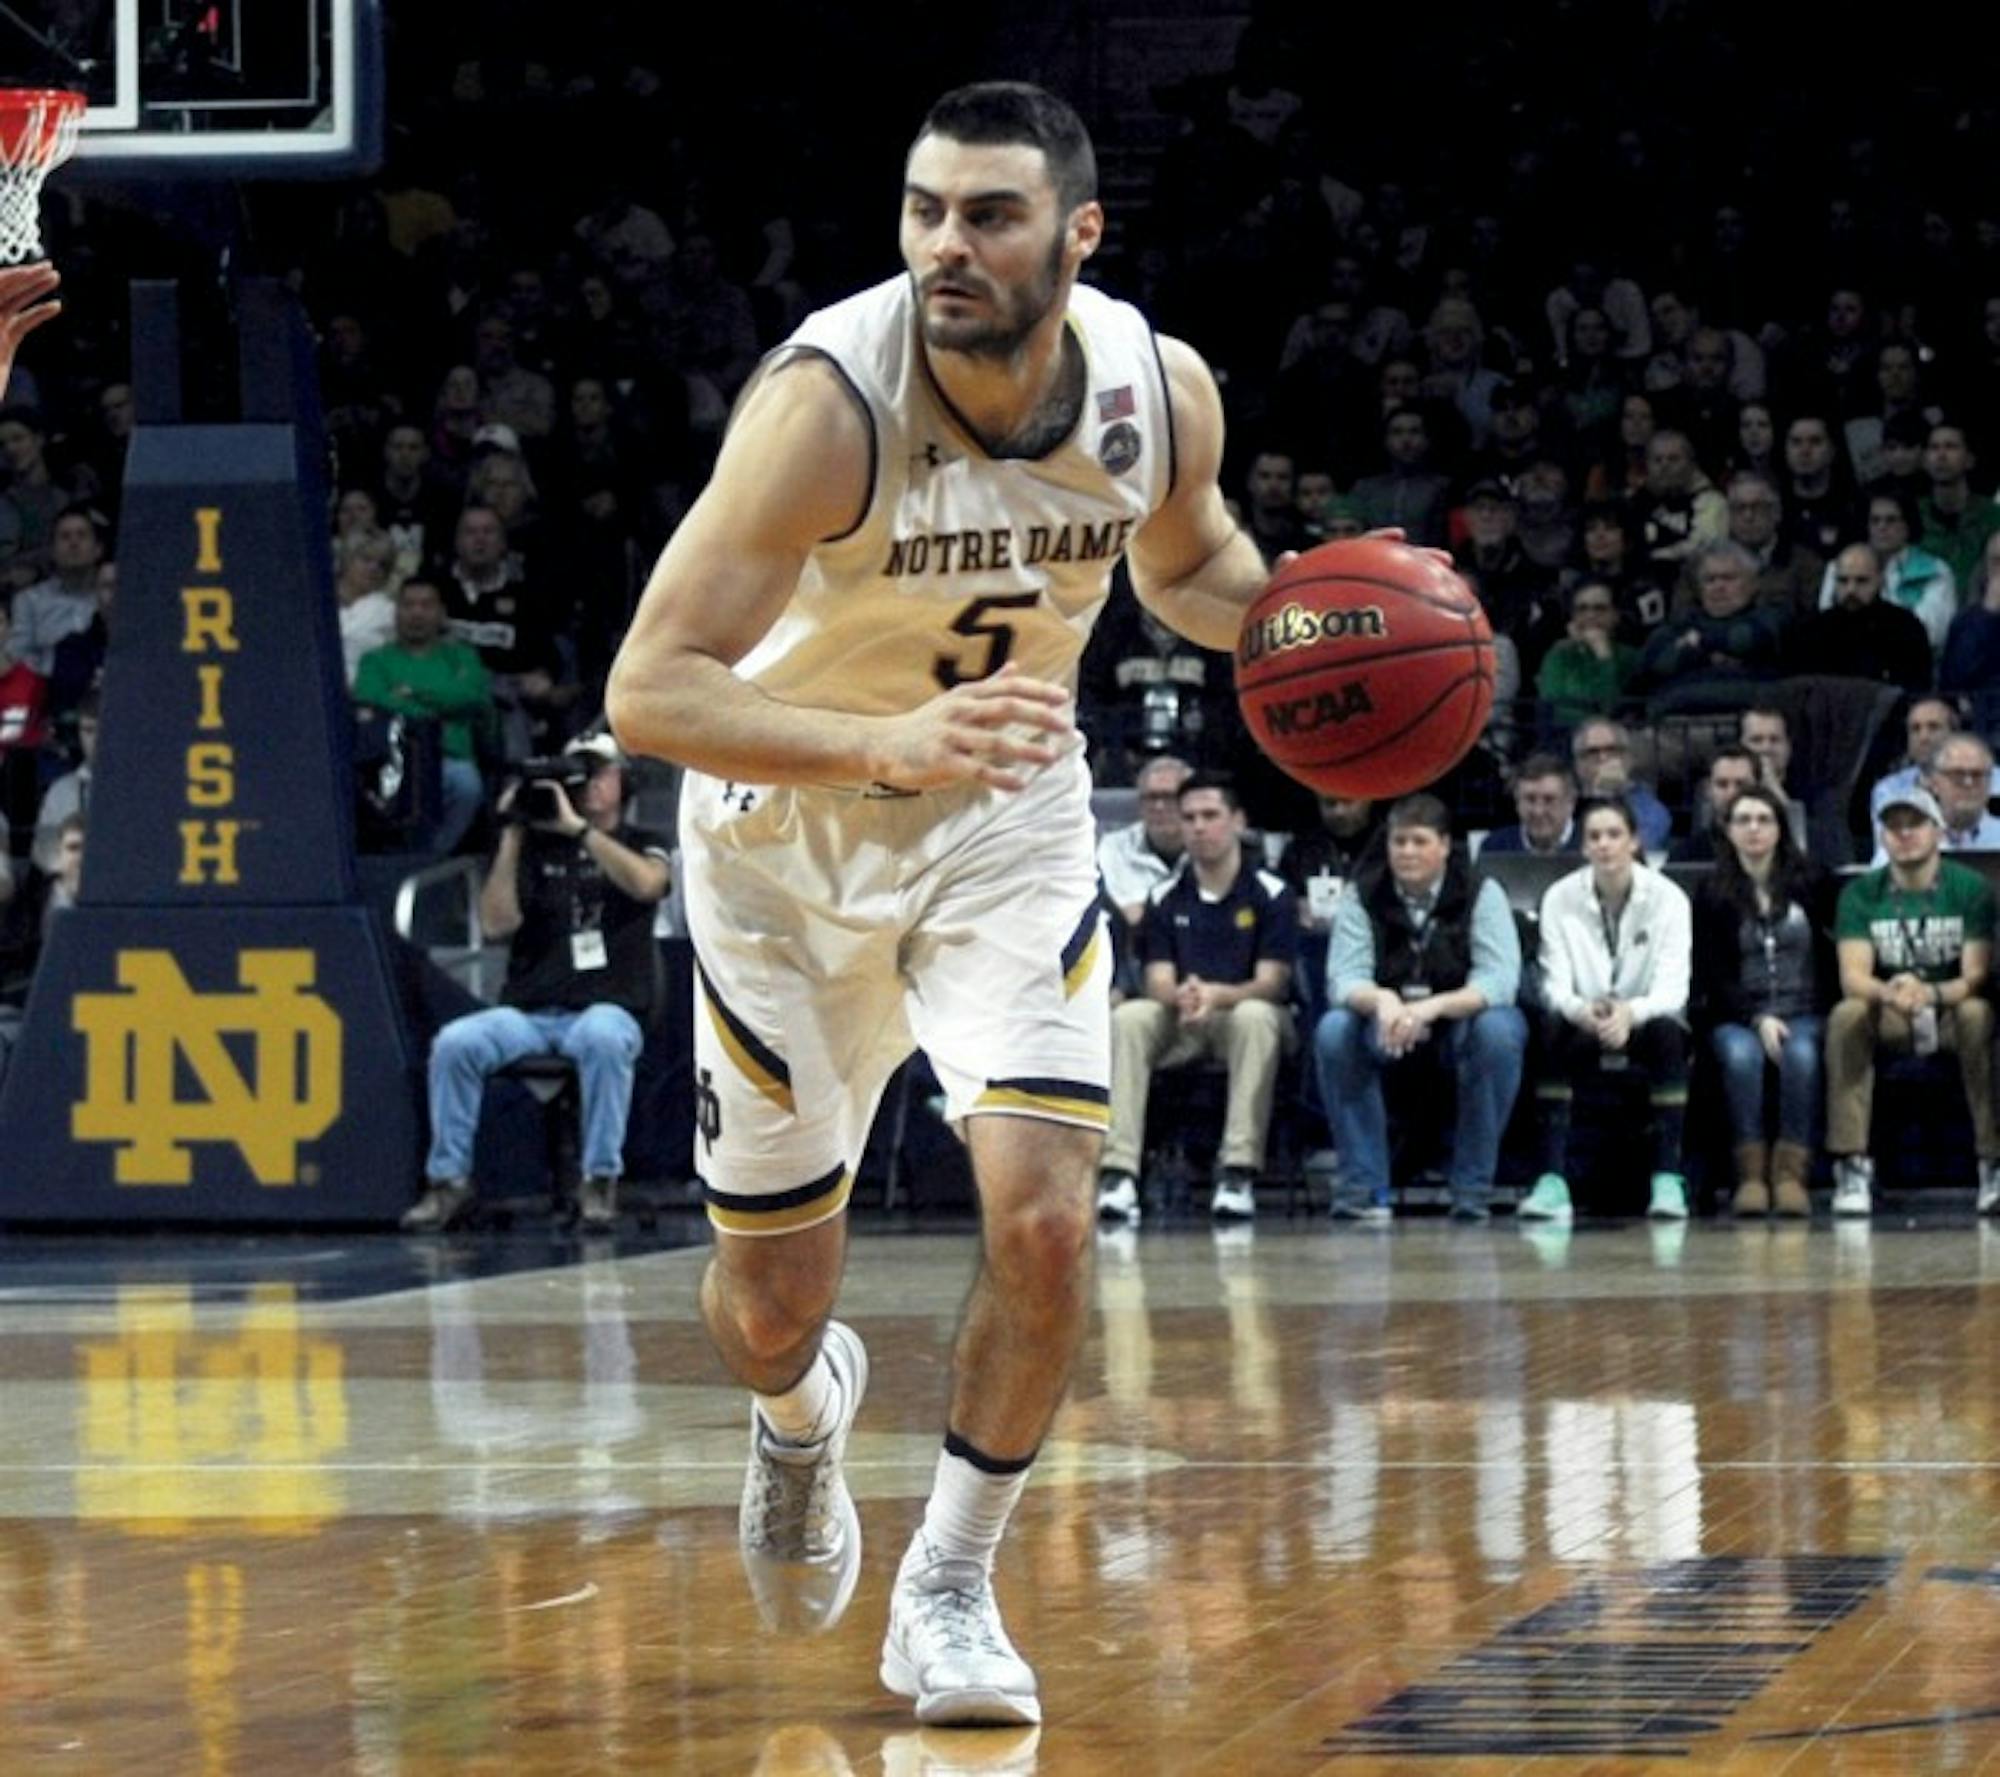 Irish junior guard Matt Farrell advances the ball up the court during Notre Dame’s 71-54 loss to Virginia on Tuesday at Purcell Pavilion. Farrell had 15 points and four assists in Notre Dame’s loss to Georgia Tech on Sunday.